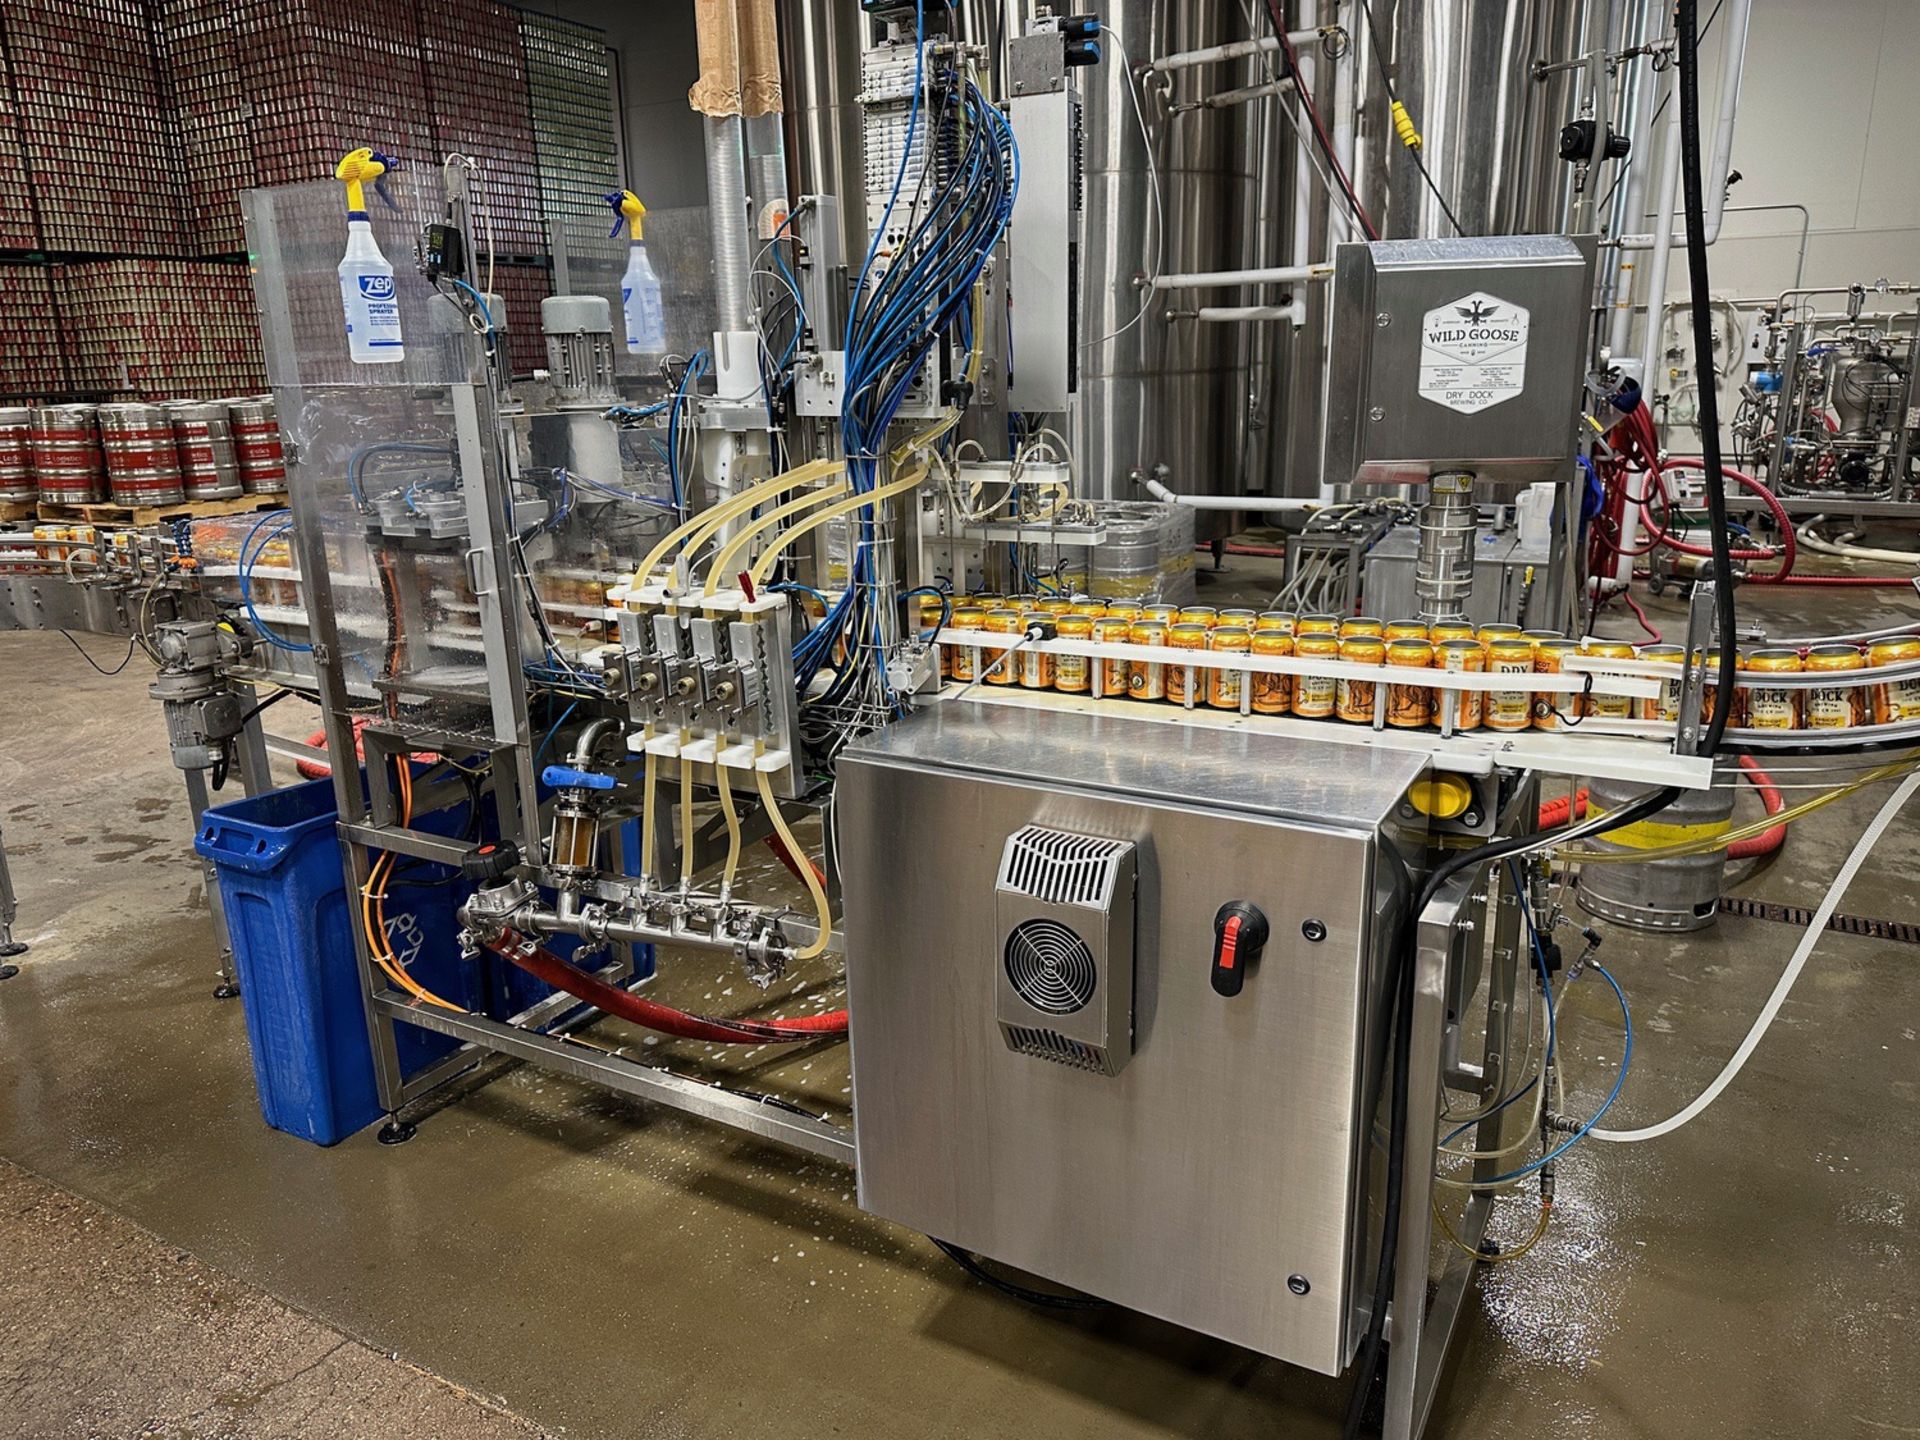 2016 Wild Goose 8-Head Canning Filler/Seamer with 12 OZ Rinse Cage - Model WGC 600, | Rig Fee $600 - Image 7 of 9